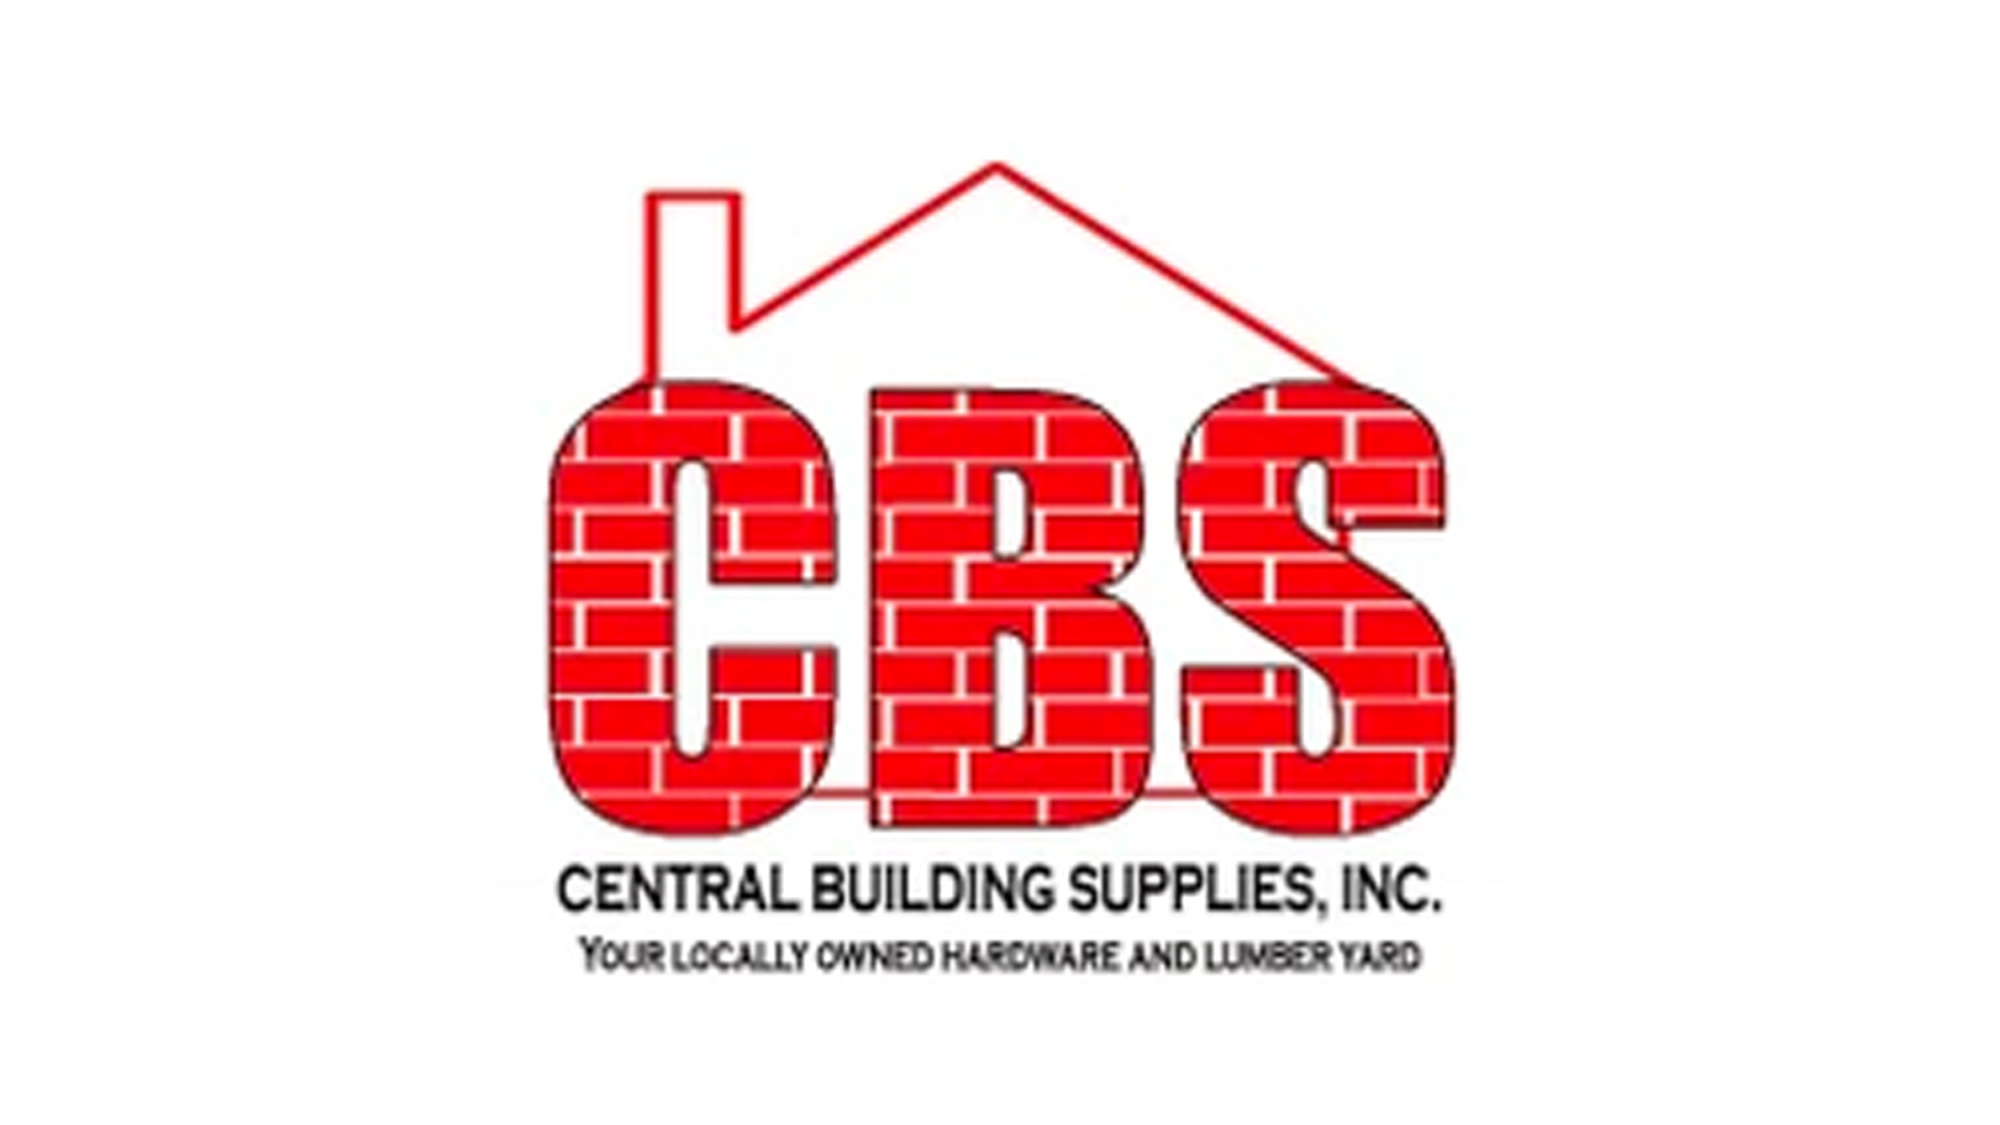 Discover the wide range of building materials and services offered by Central Building Supply. From lumber and power tools to plumbing supplies and paint, they are your comprehensive hardware and lumber yard. Read our review to learn more about their offerings and exceptional customer service. Partner with Gott Marketing for all your marketing needs in the building supply industry.